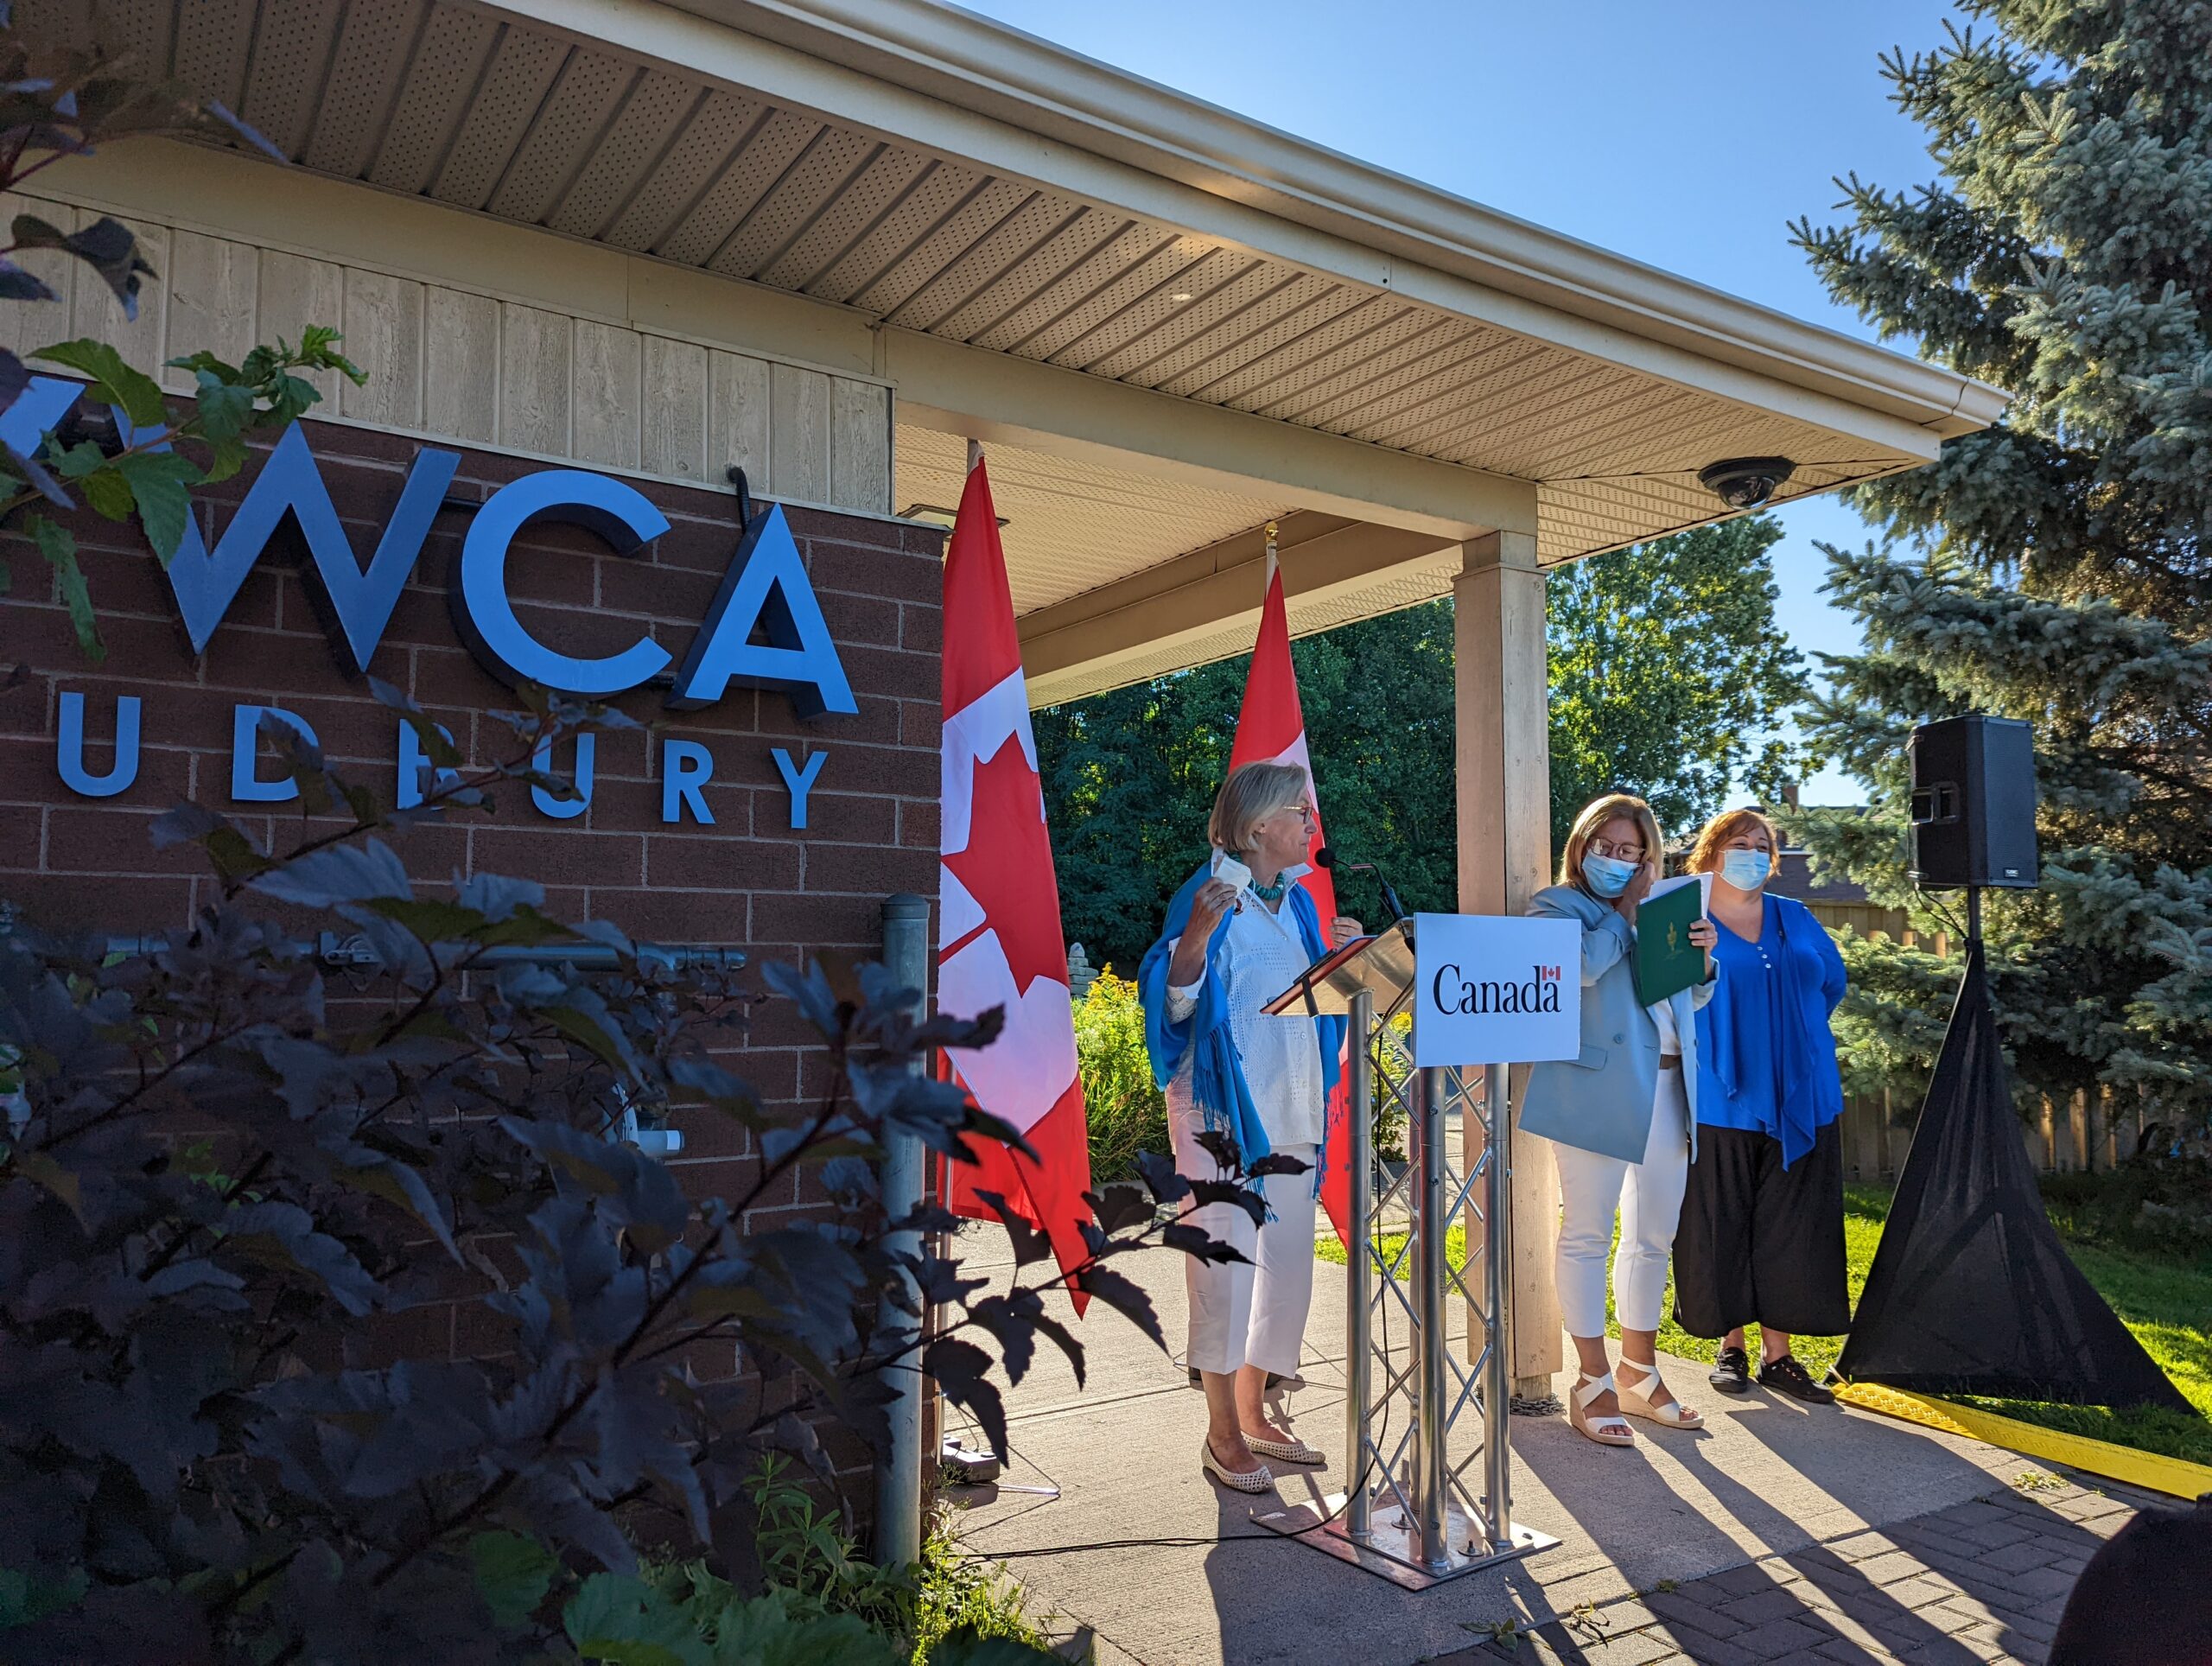 Hon. Minister Bennett, MP Lapointe, and YWCA Executive Director Marlene Gorman at the podium in front of the YWCA Sudbury building